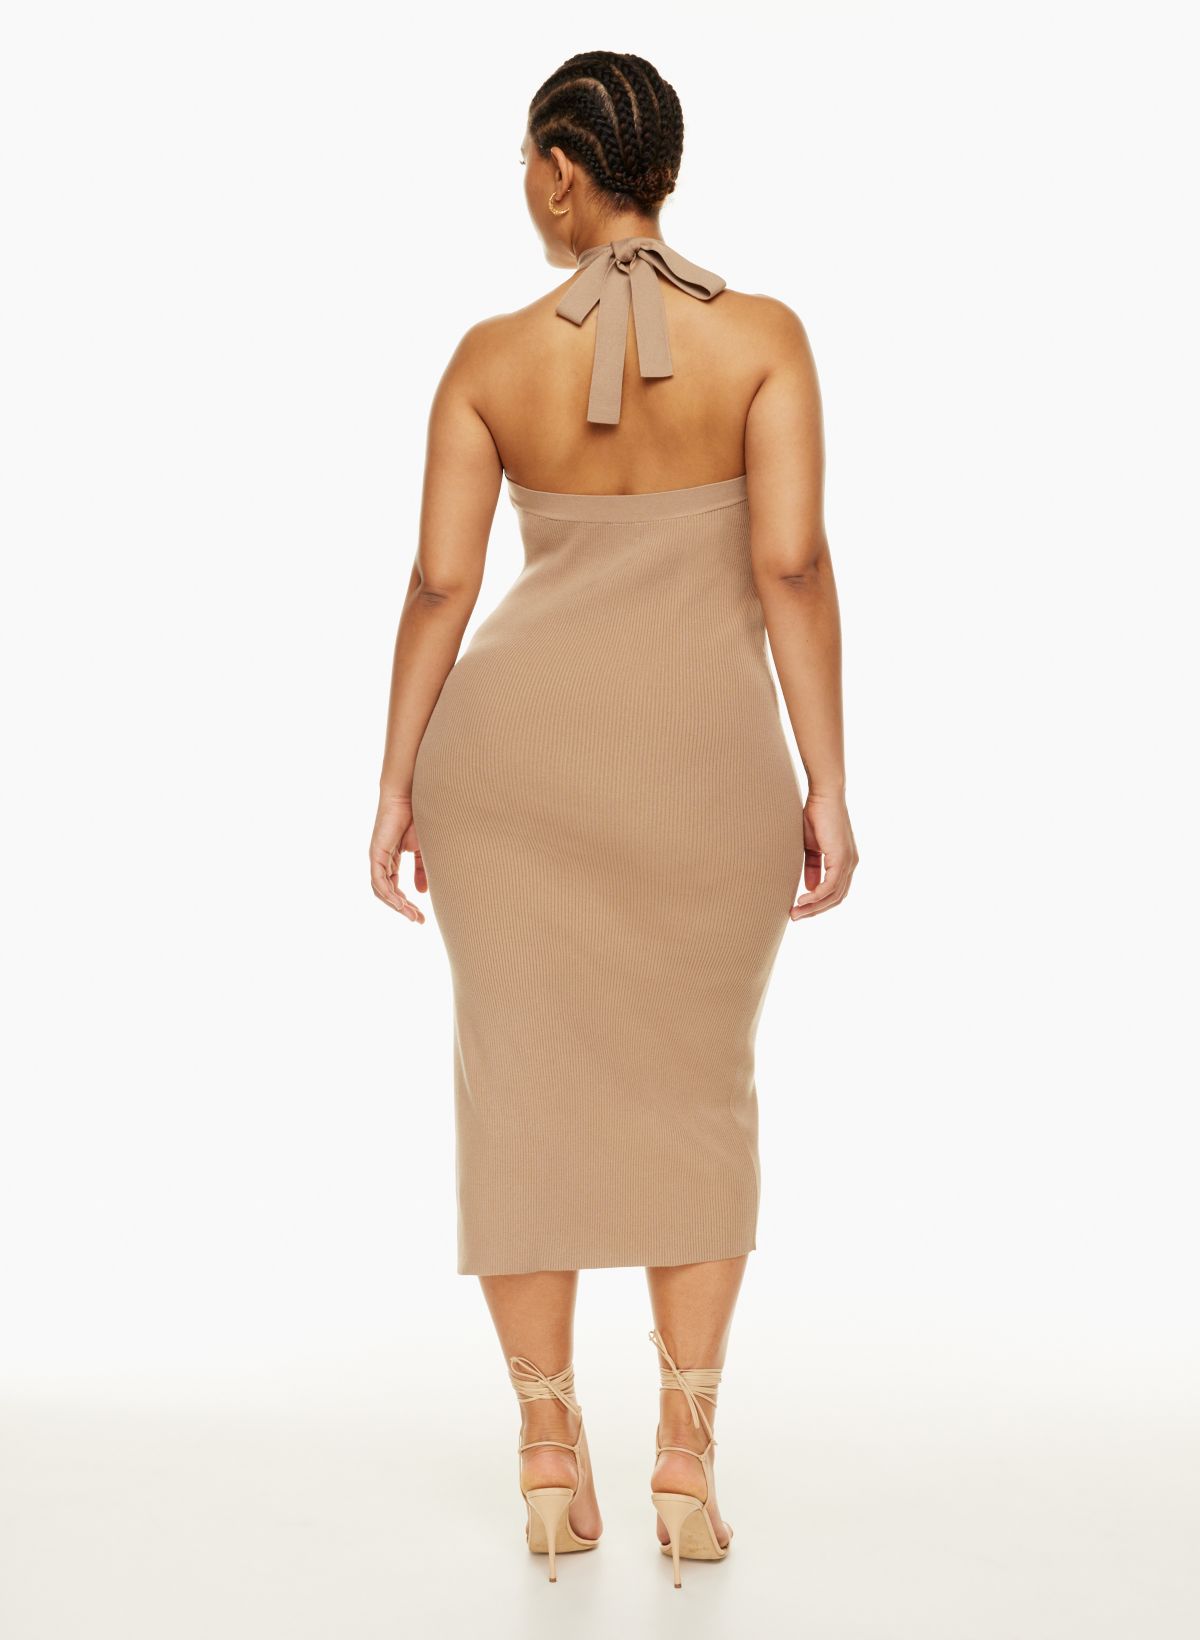 Buy Brown Halter Dress for Women Thick Bra Straps Bright Color